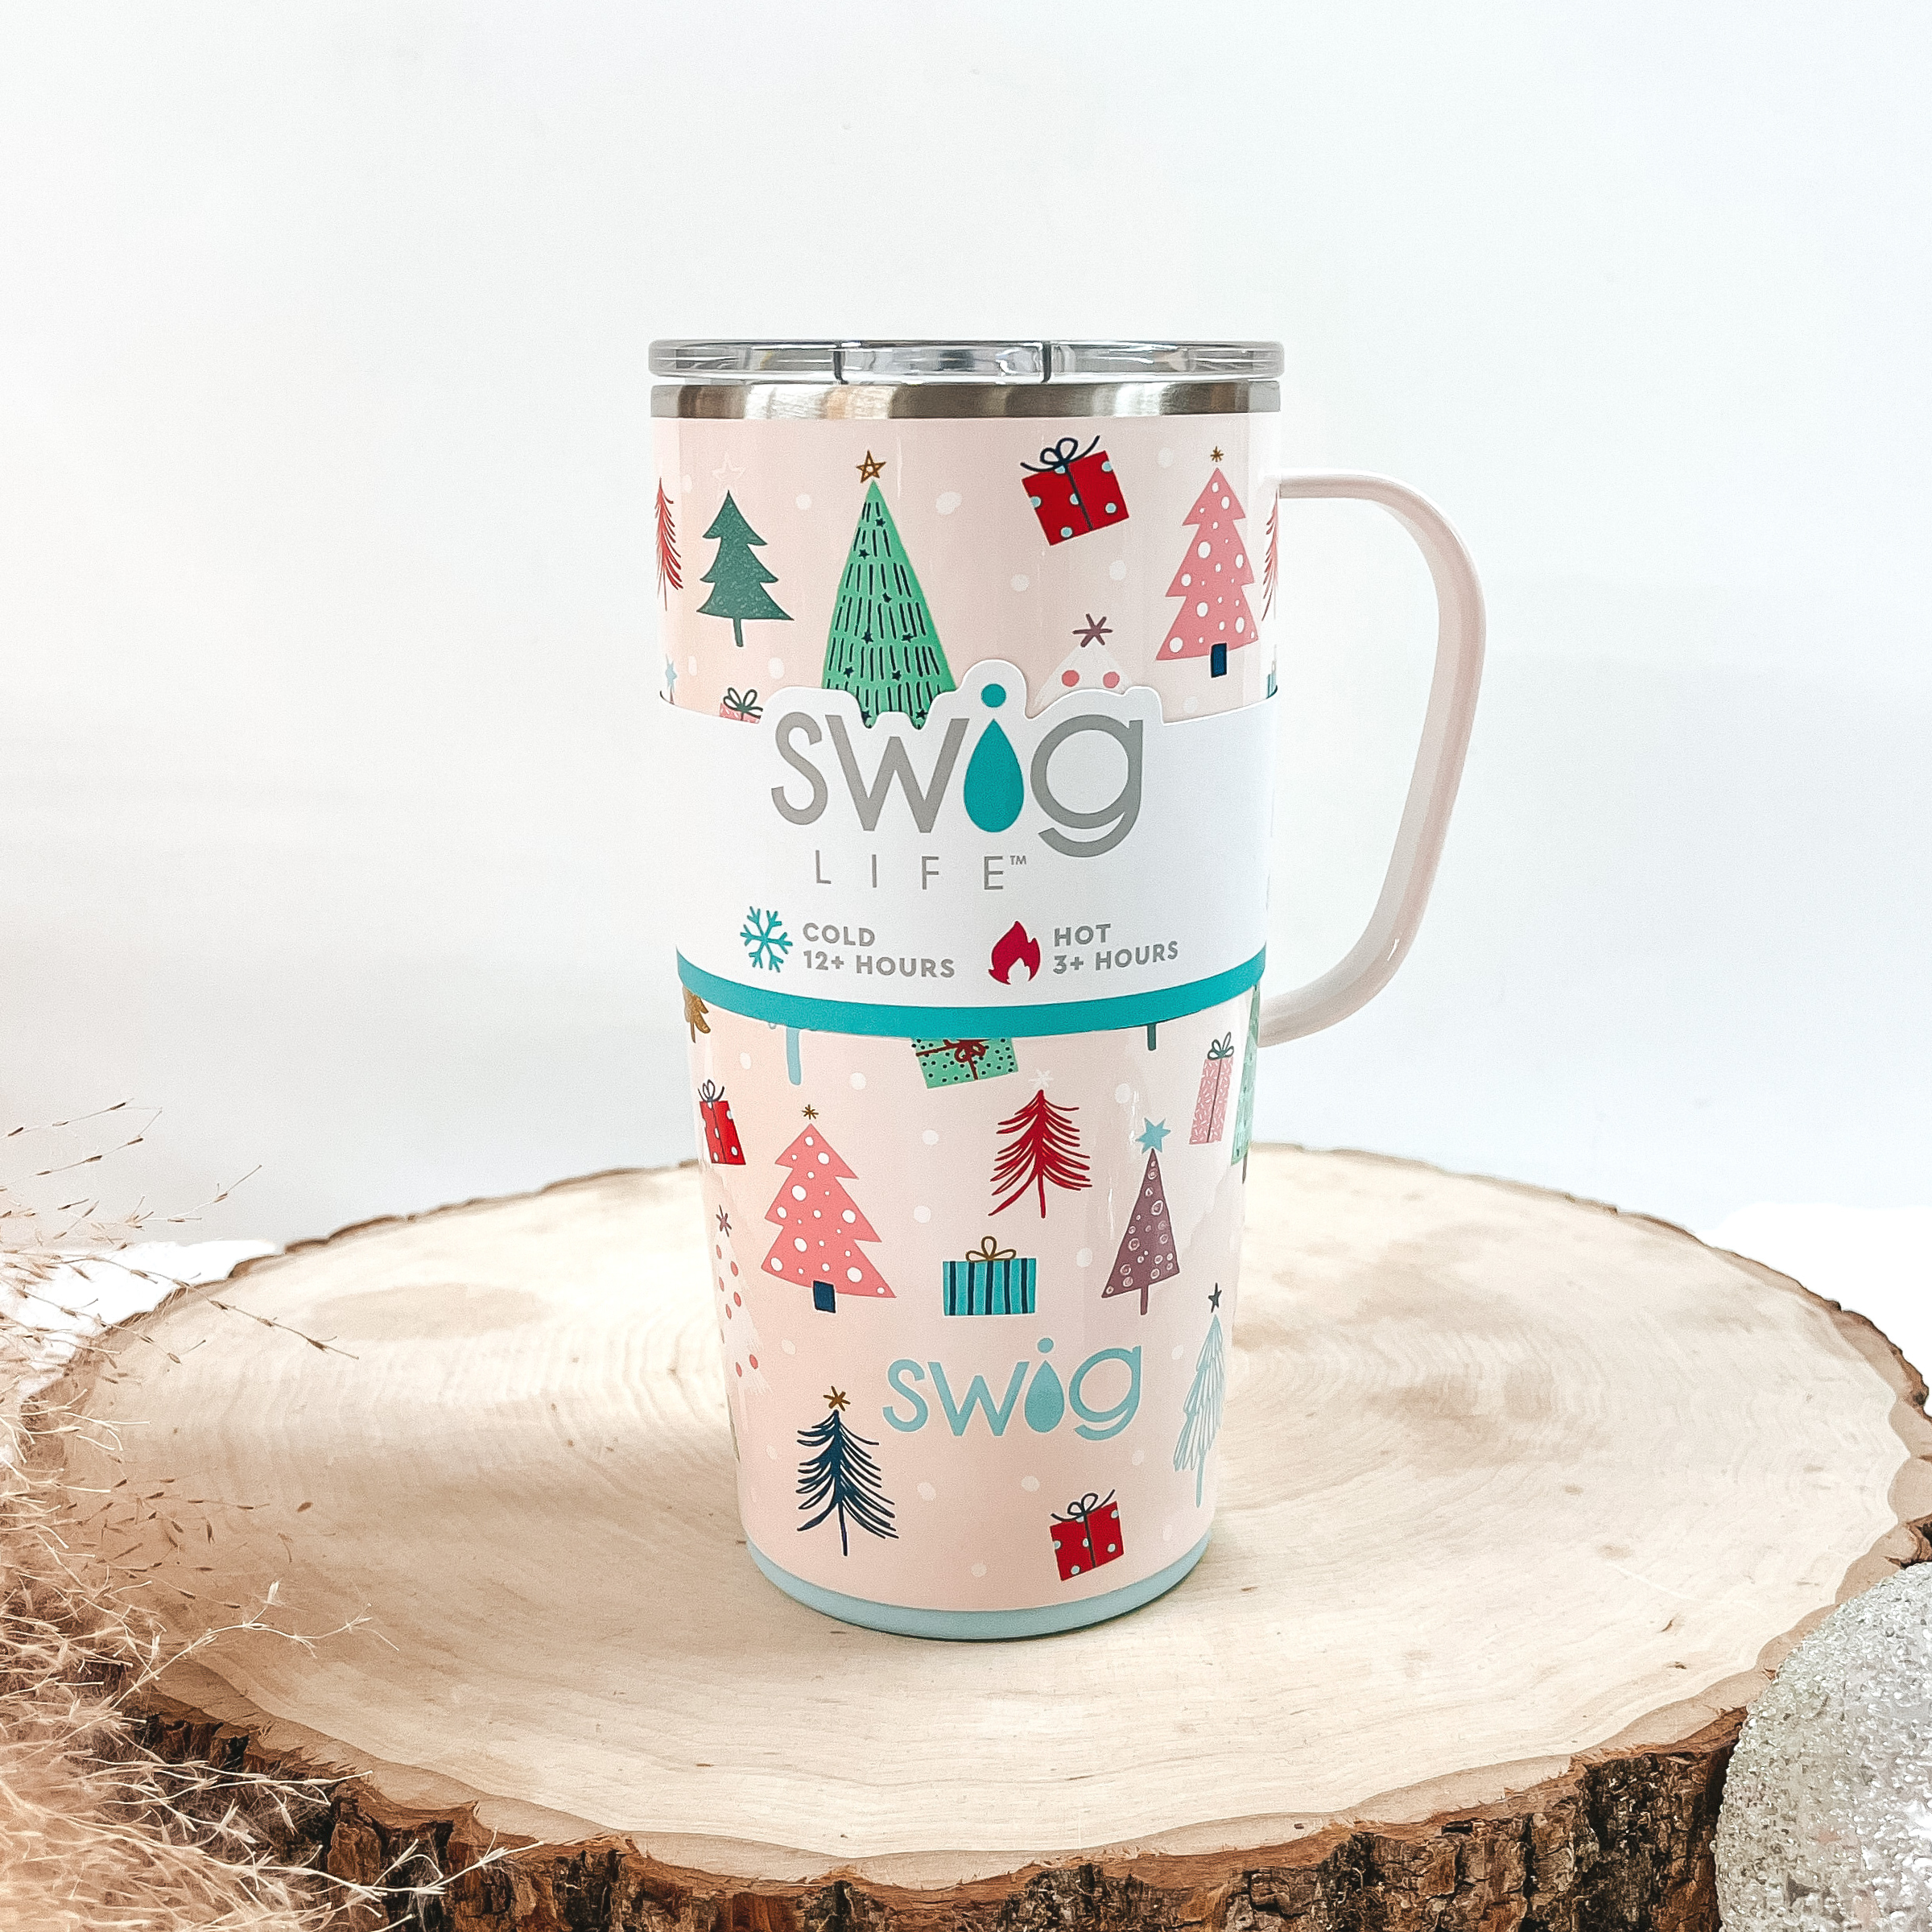 Blush pink mug with multicolored tree and present print with a blush pink handle and clear lid. This can cooler is pictured on a piece of wood on a white background.